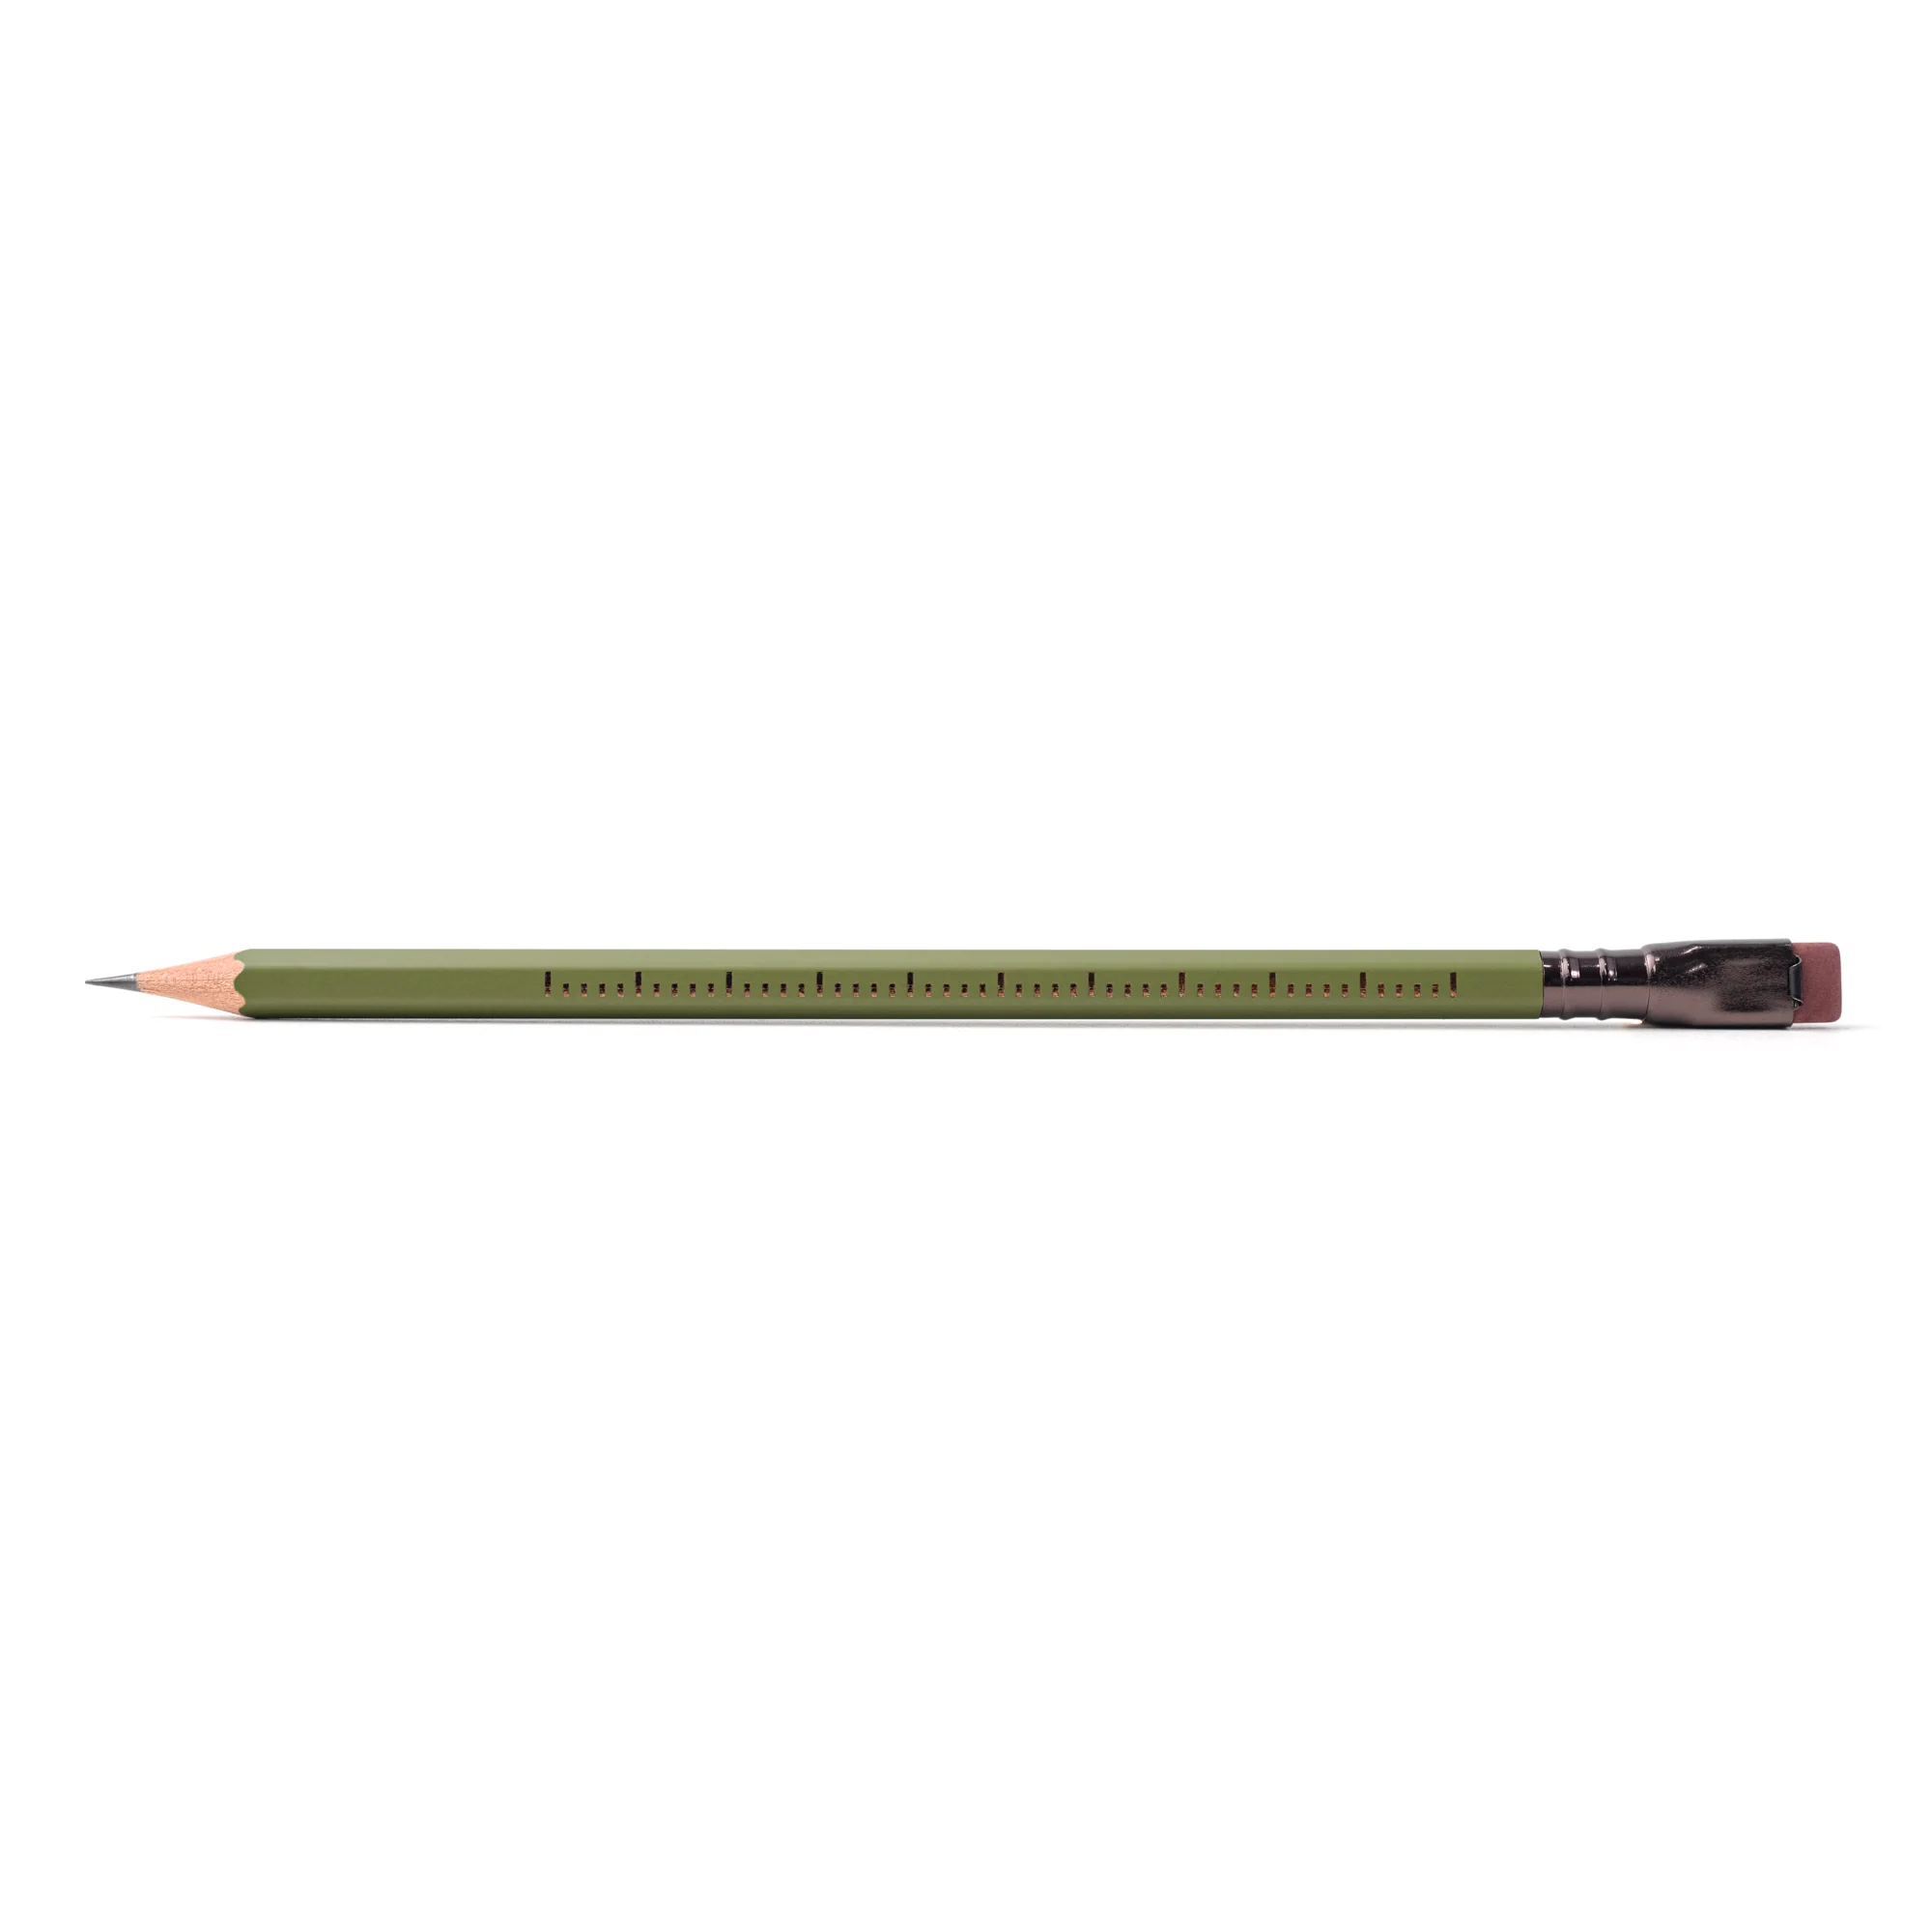 Wellspring-Colored Pencils with Sharpener